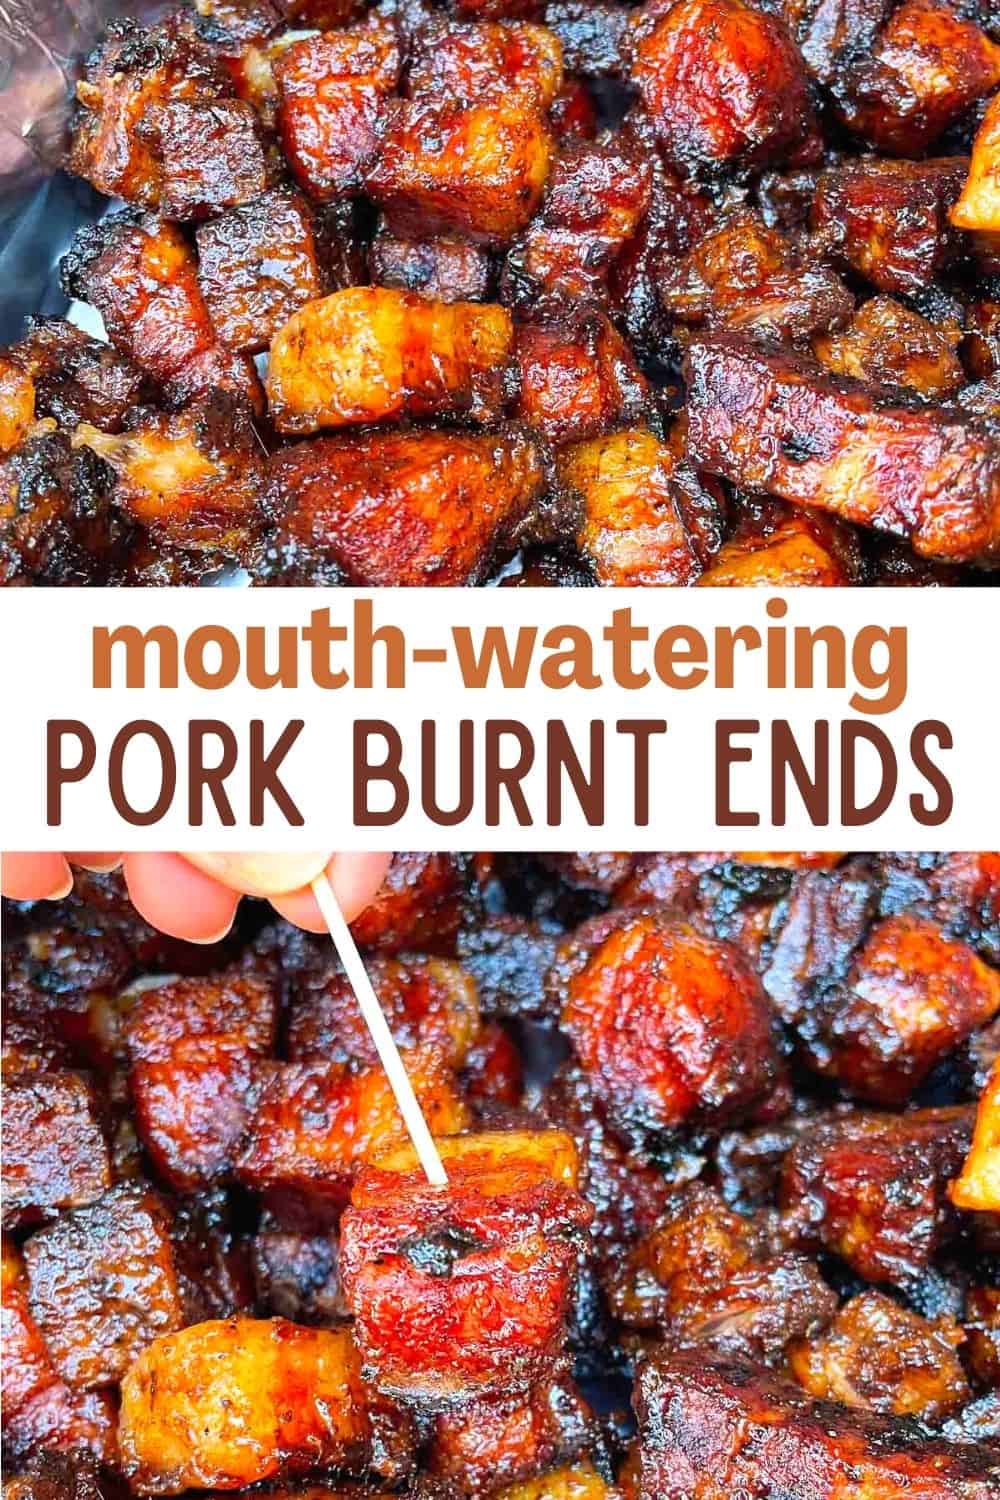 Smoked pork belly burnt ends are a crowd favorite. We have the most tender, flavorful and mouthwatering BBQ pork burnt ends recipe right here.